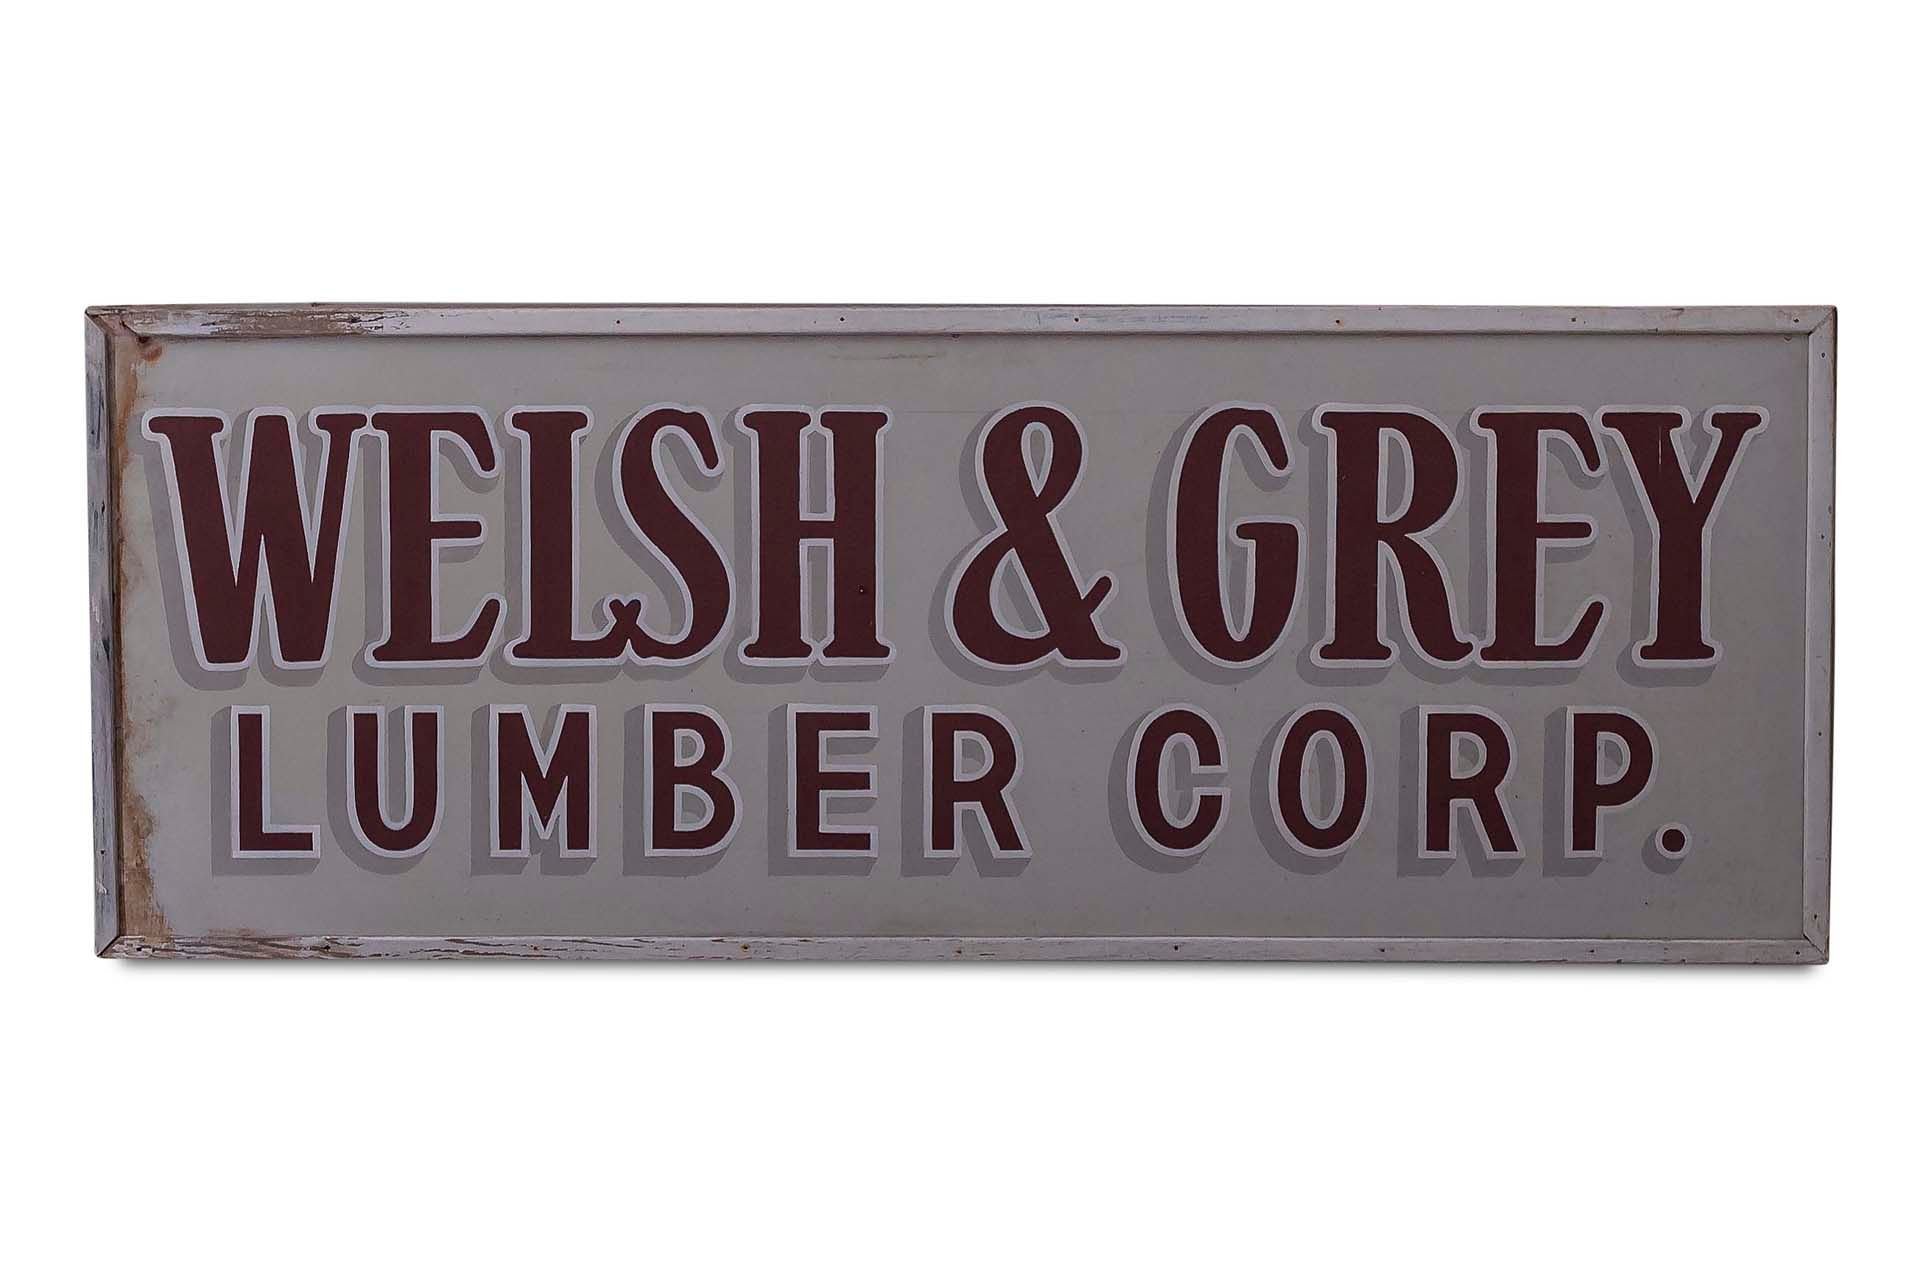 For Sale 'Welsh & Grey Lumber Corp." Wood Painted Sign